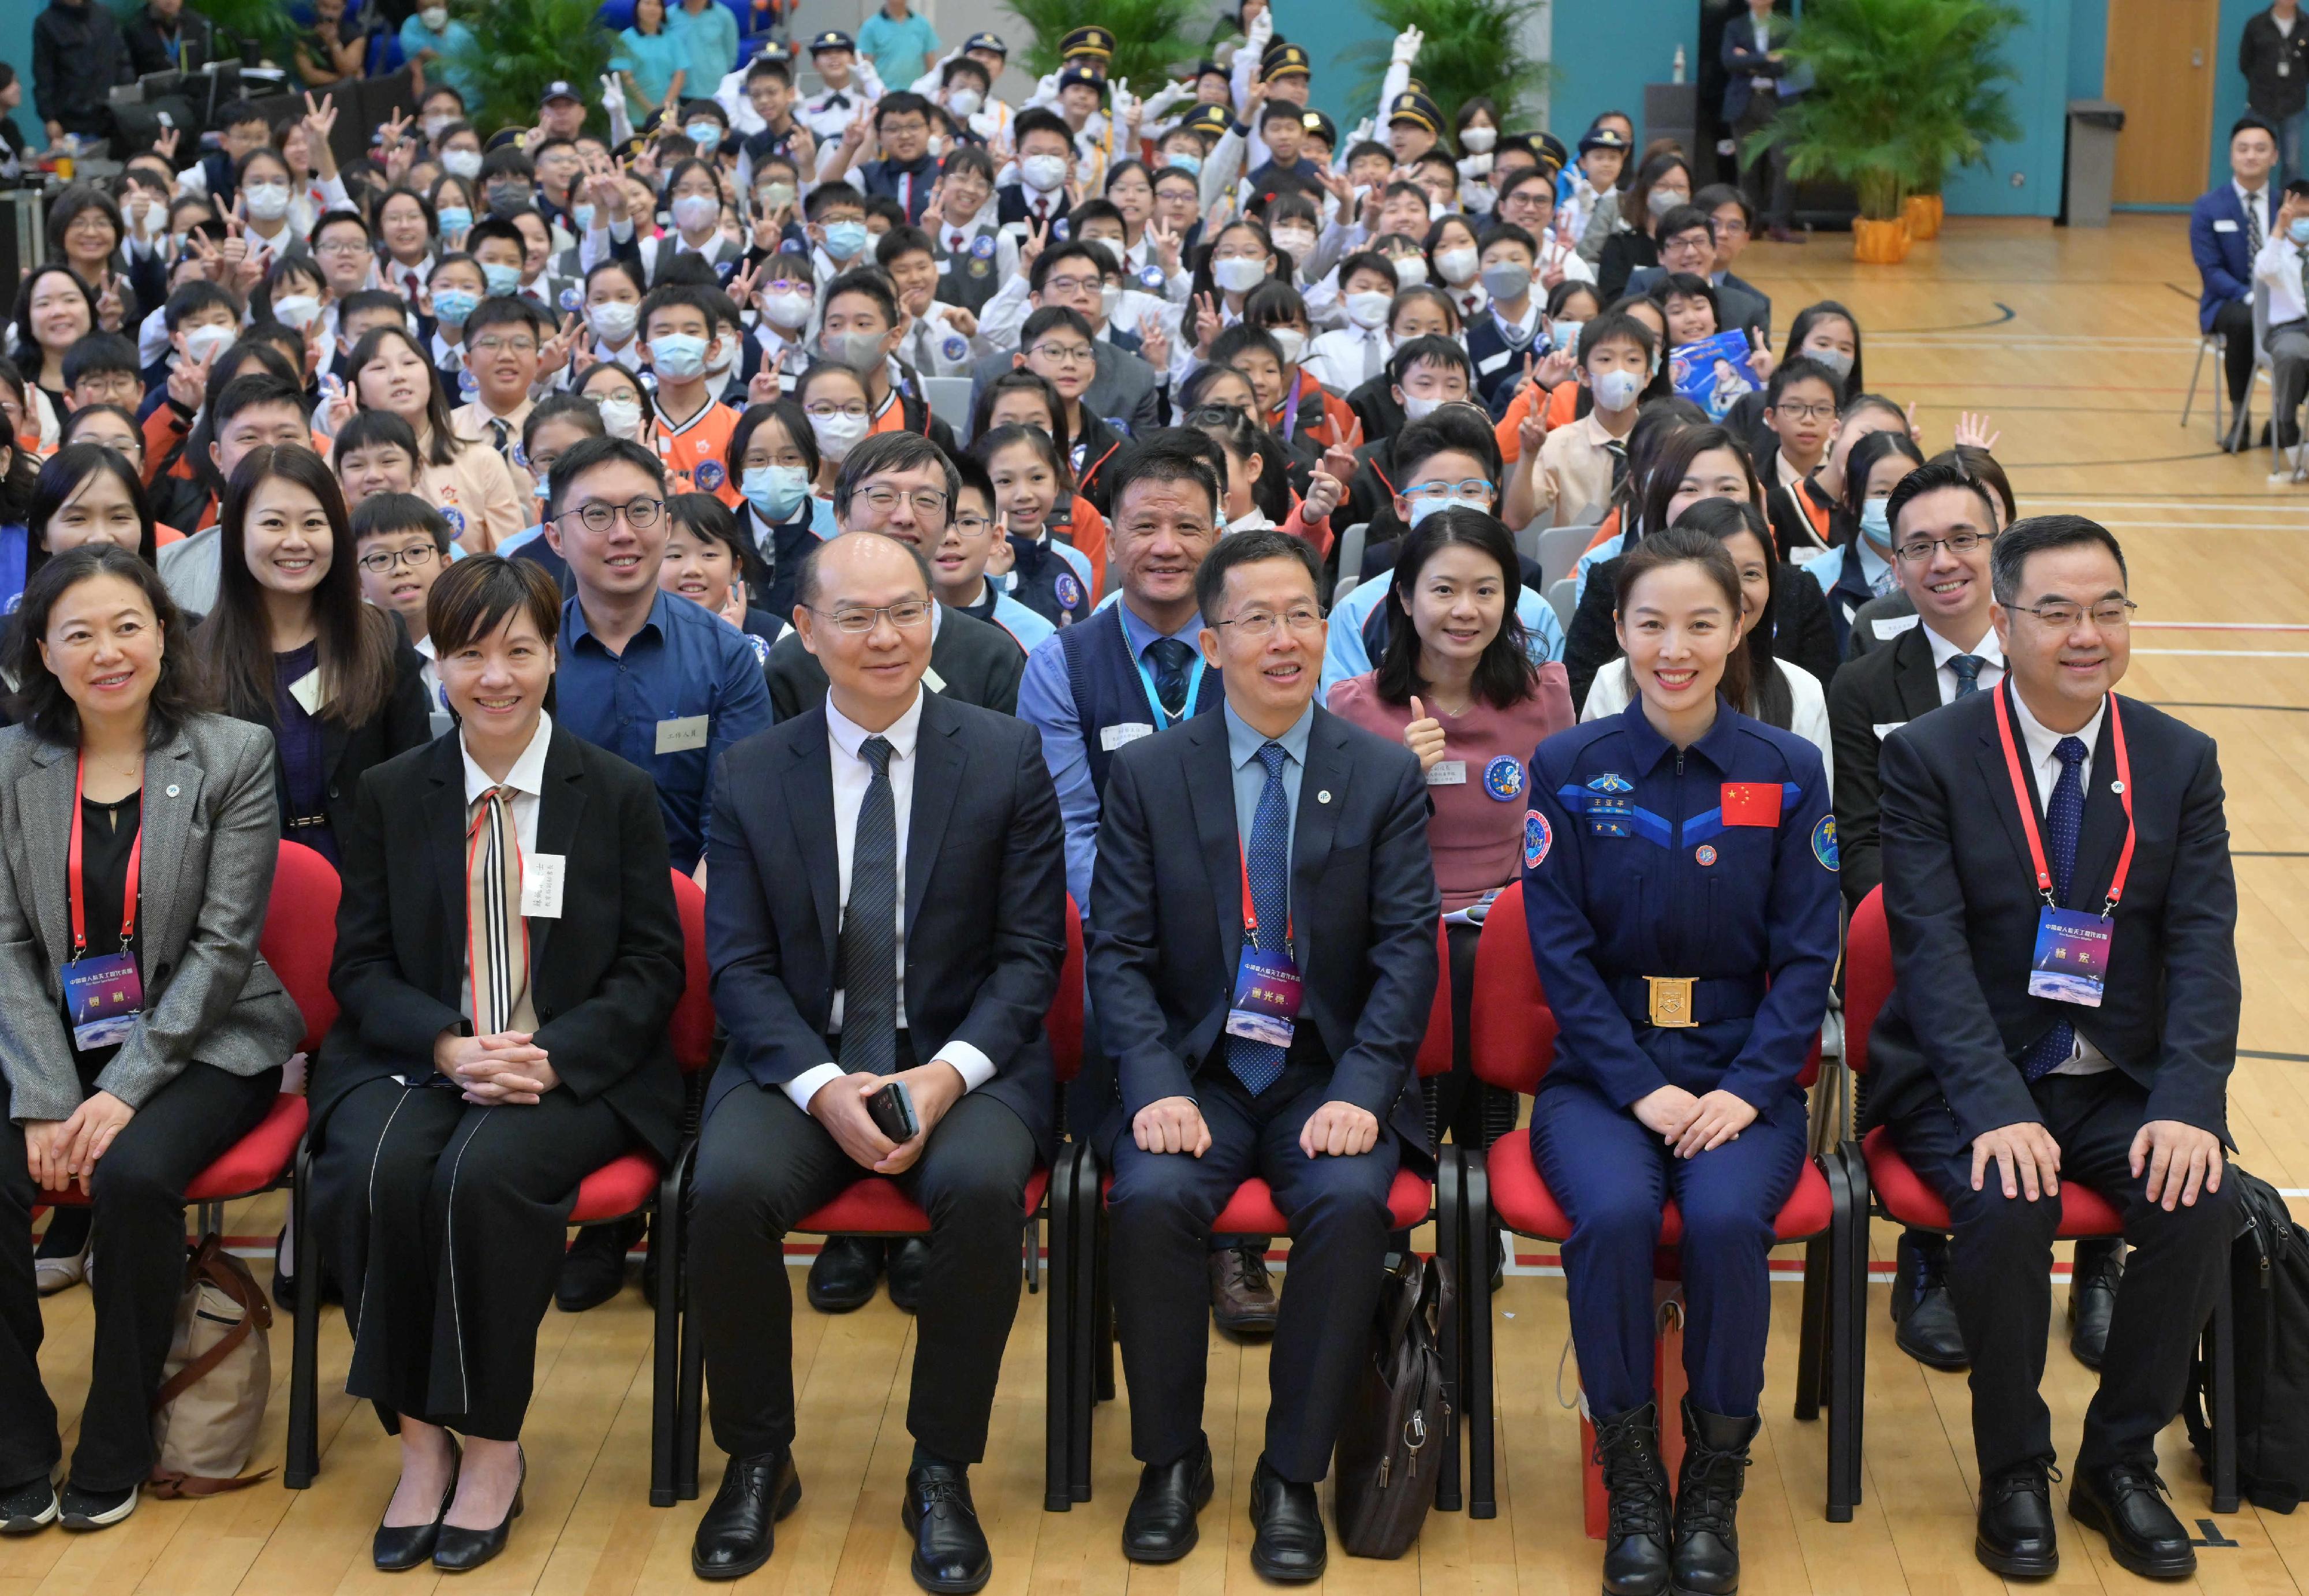 The China Manned Space delegation continued their visit in Hong Kong today (November 29). Photo shows Shenzhou-13 astronaut Ms Wang Yaping (first row, second right) attending a dialogue session with students at Hong Kong Baptist University Affiliated School Wong Kam Fai Secondary and Primary School (Primary Division).





